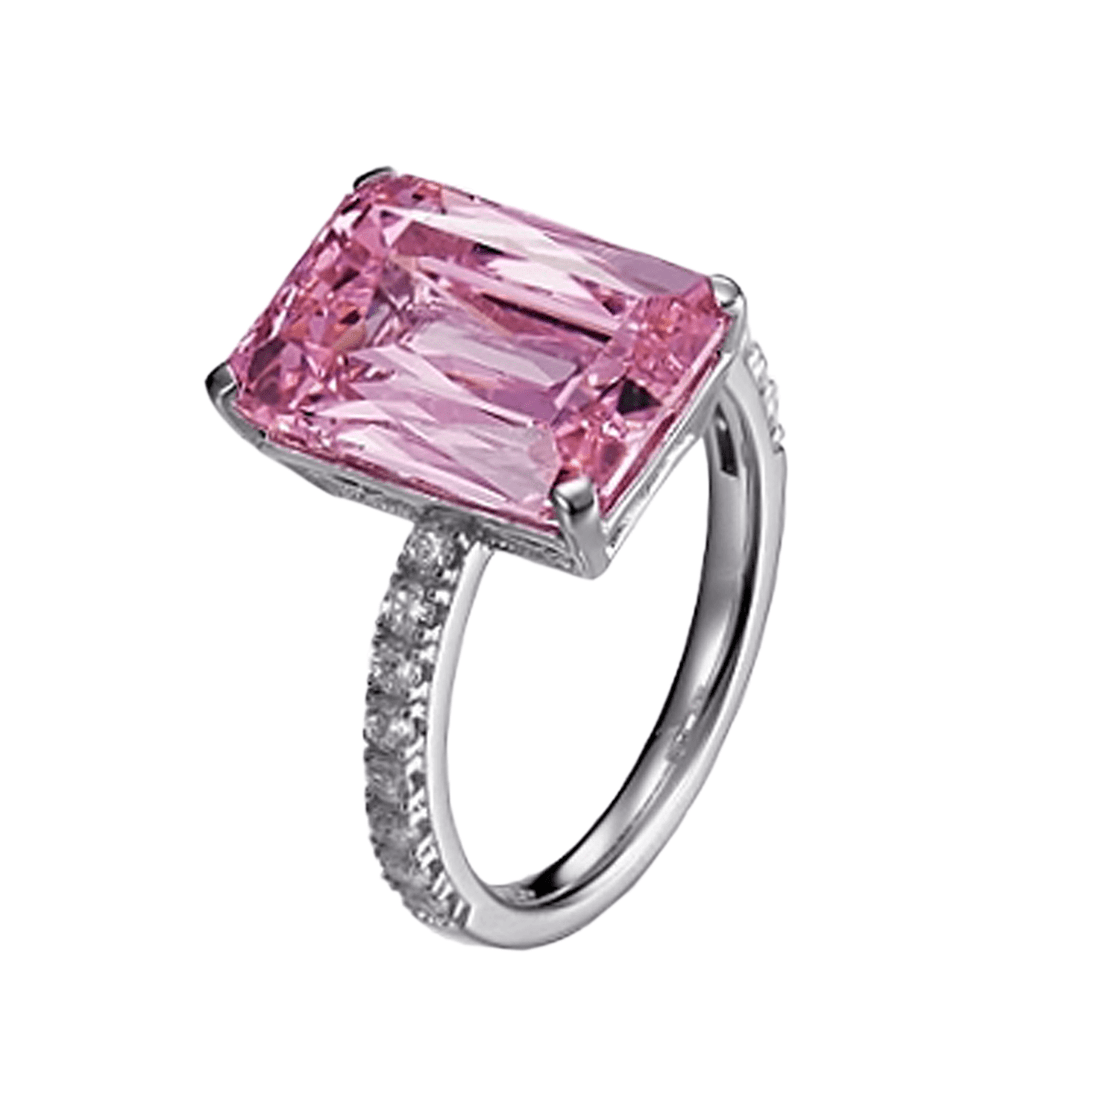 8.00ct Pink Spinel &amp; 0.40ct Cubic Zirconia Emerald Cut Ring in Rhodium Plated Silver